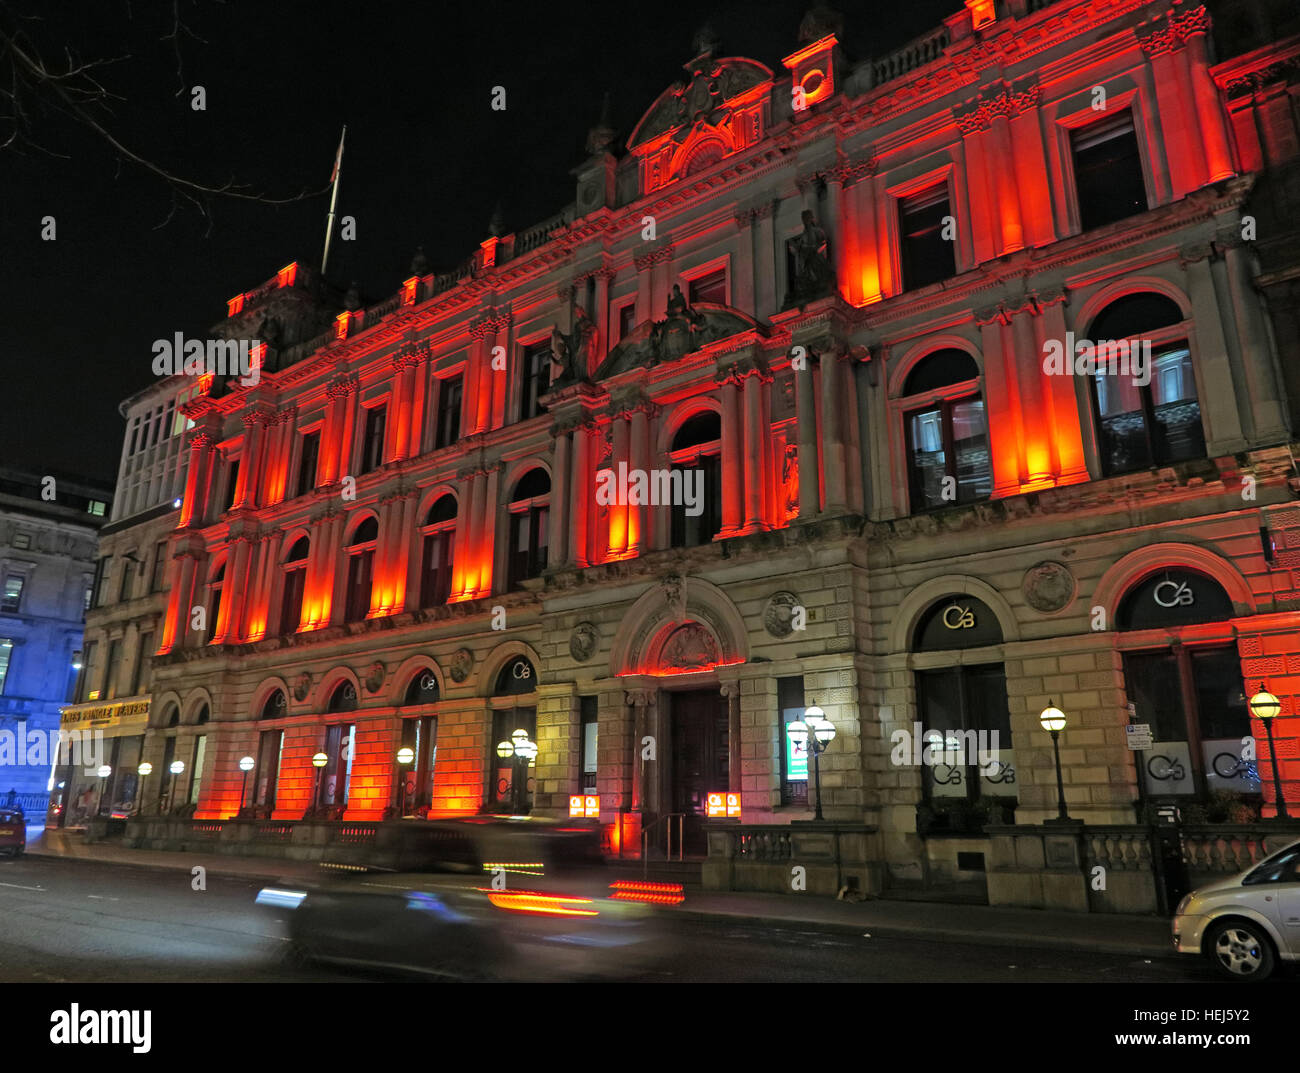 Clydesdale Bank Chambers at Night,Glasgow,near George Square, Scotland, UK Stock Photo